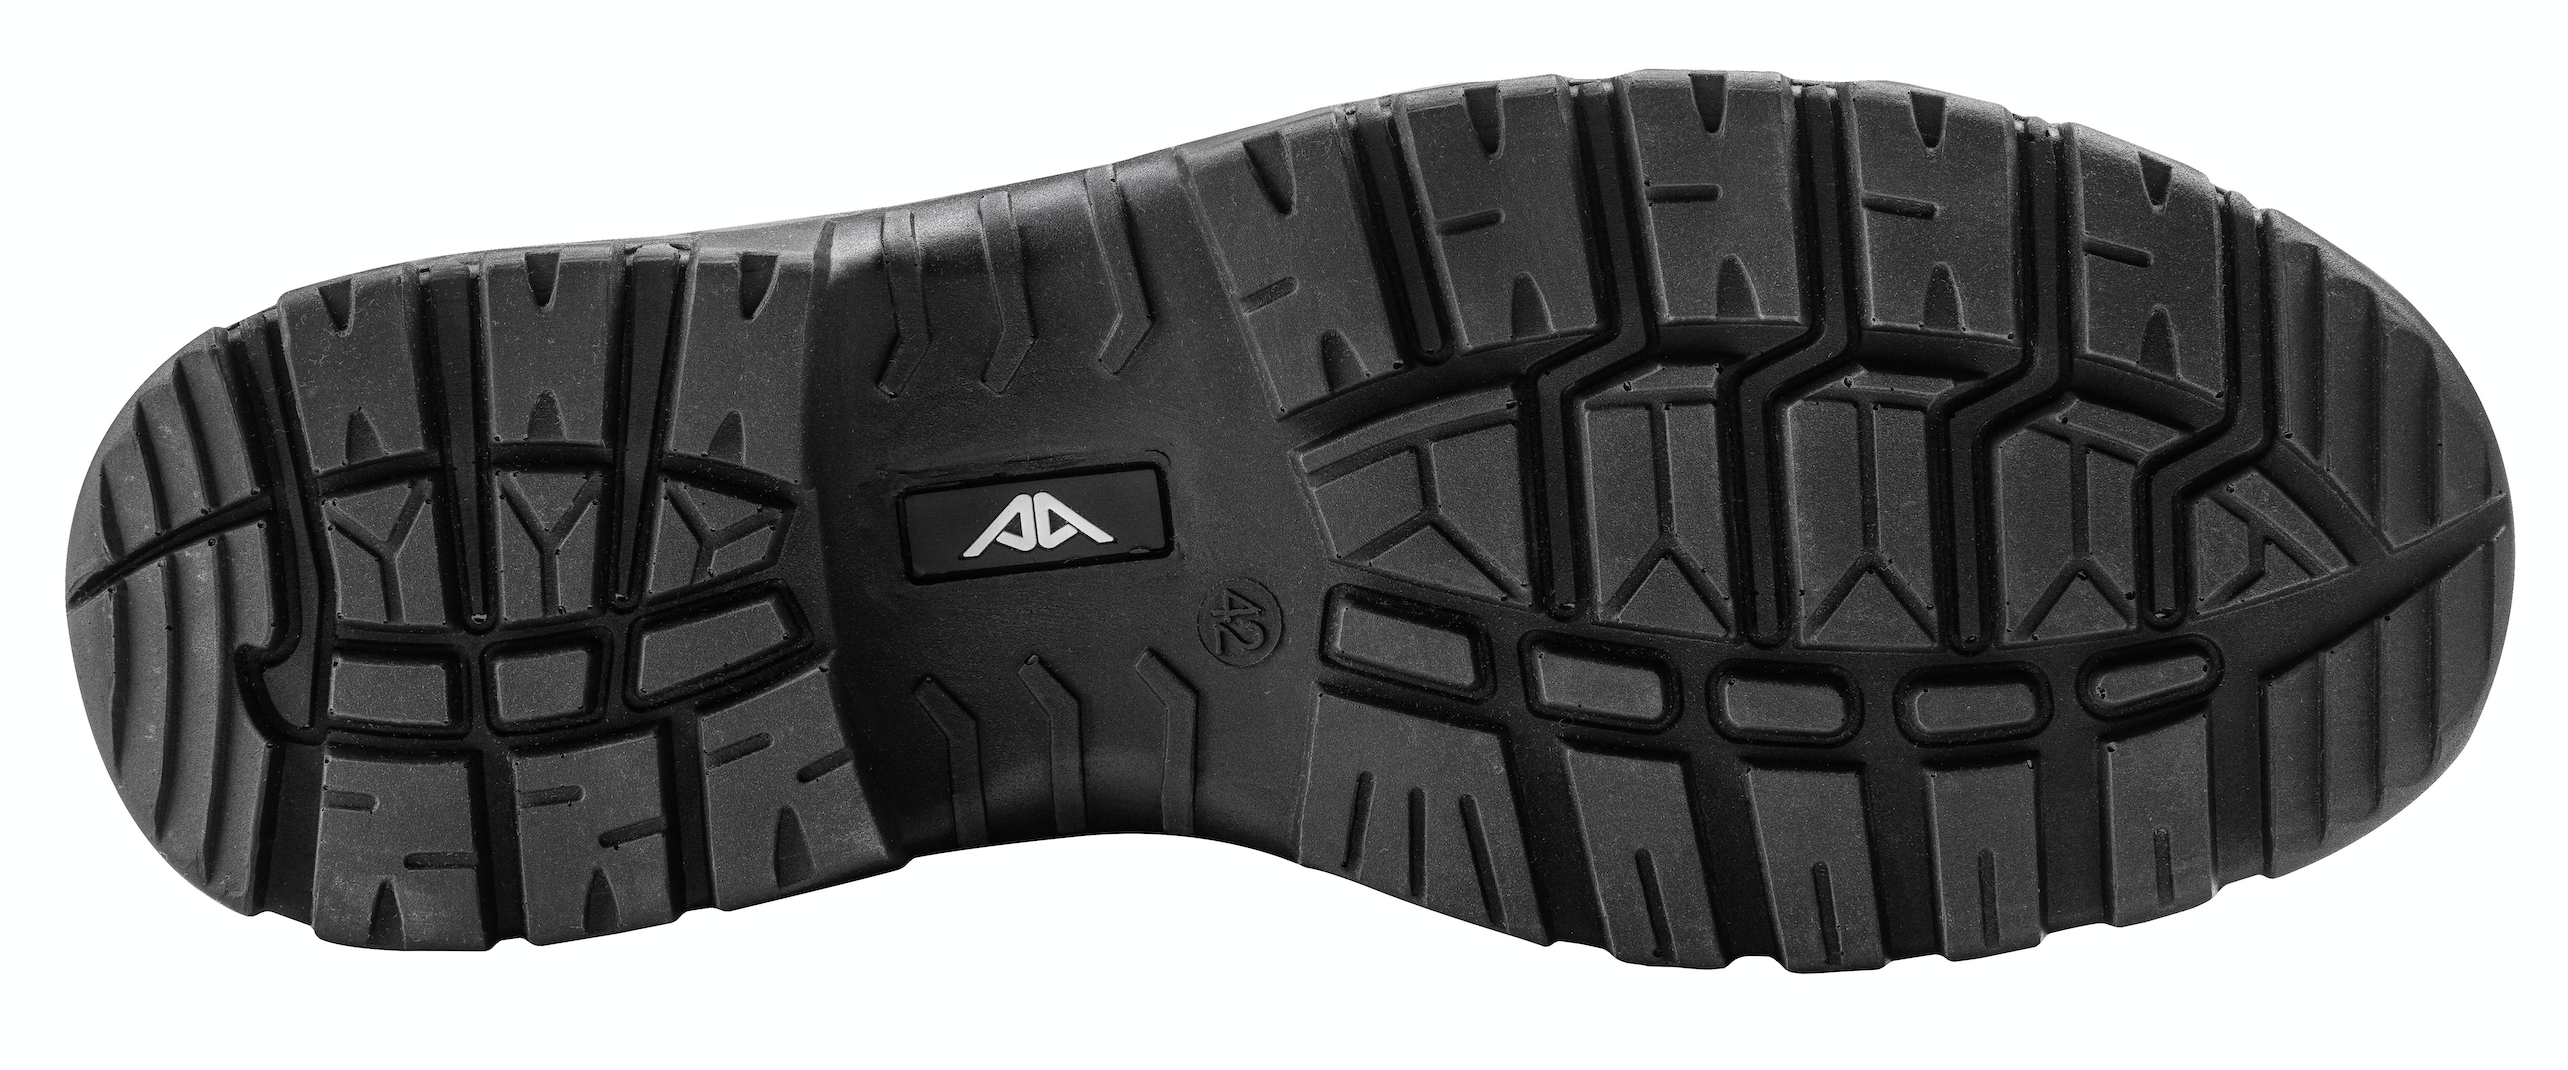 A-FLY Low Black 4